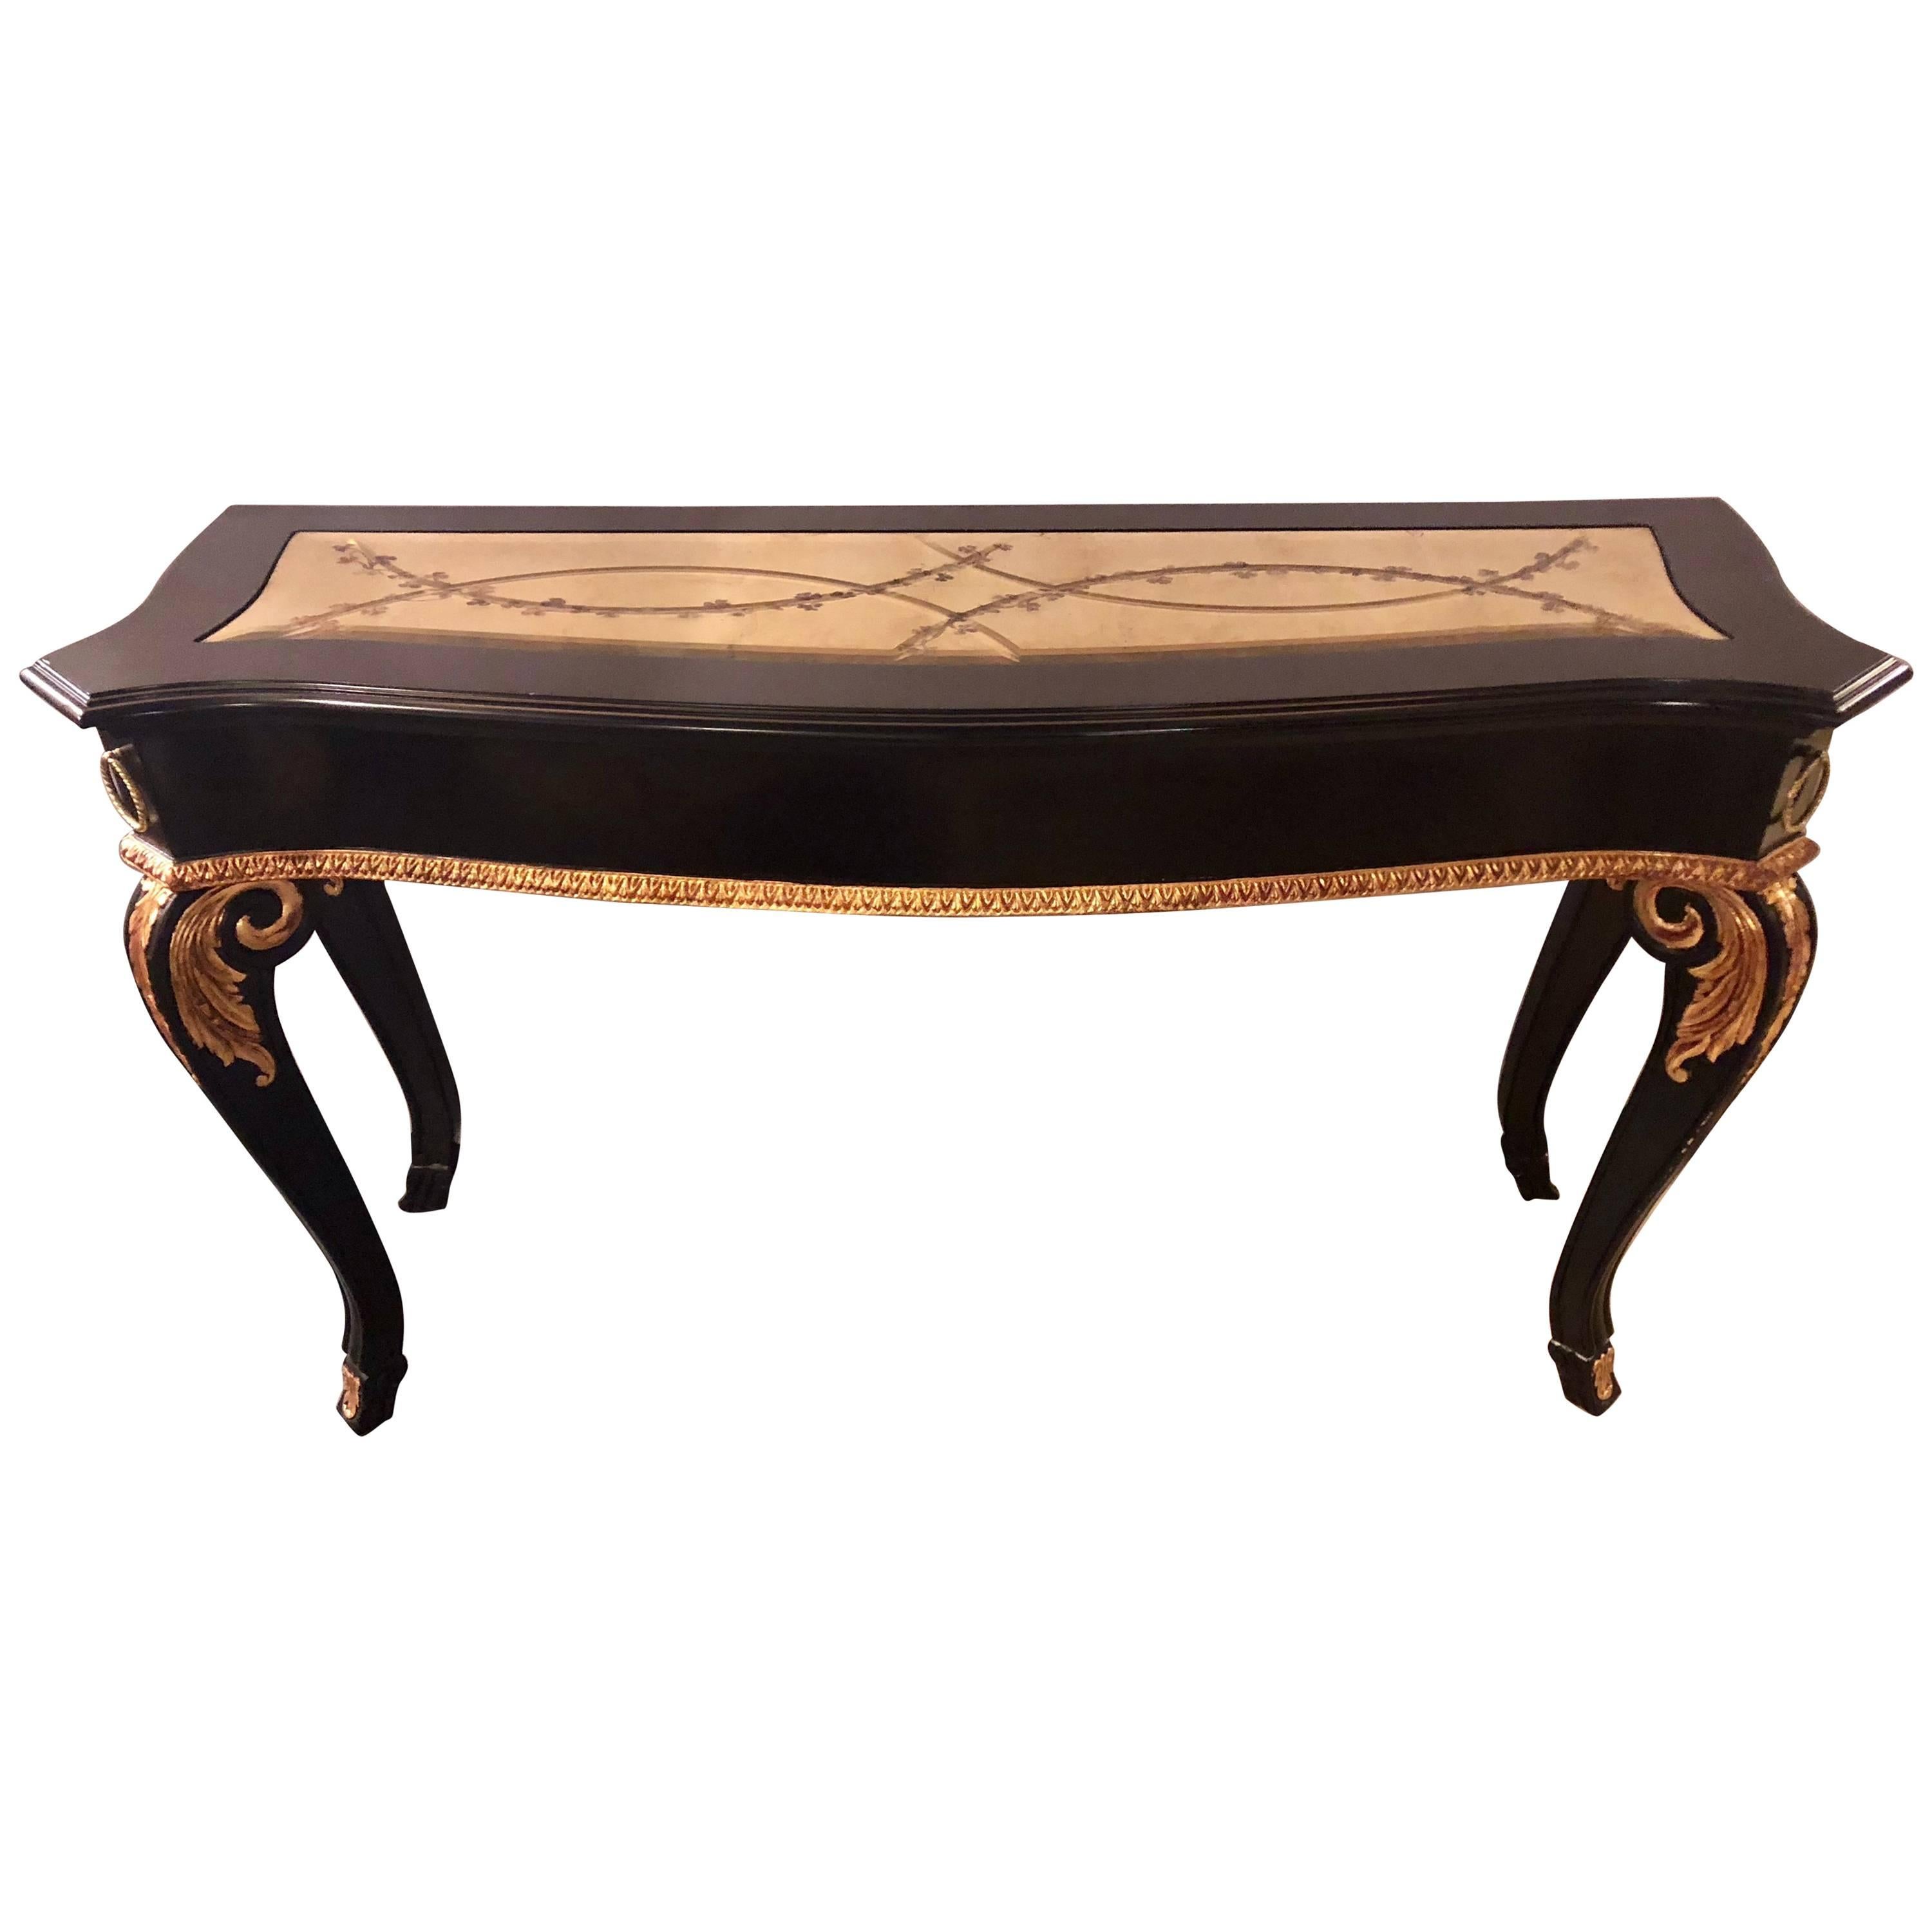 Ebony and Parcel-Gilt Decorated Console / Sofa Table with Fine Beveled Glass Top For Sale